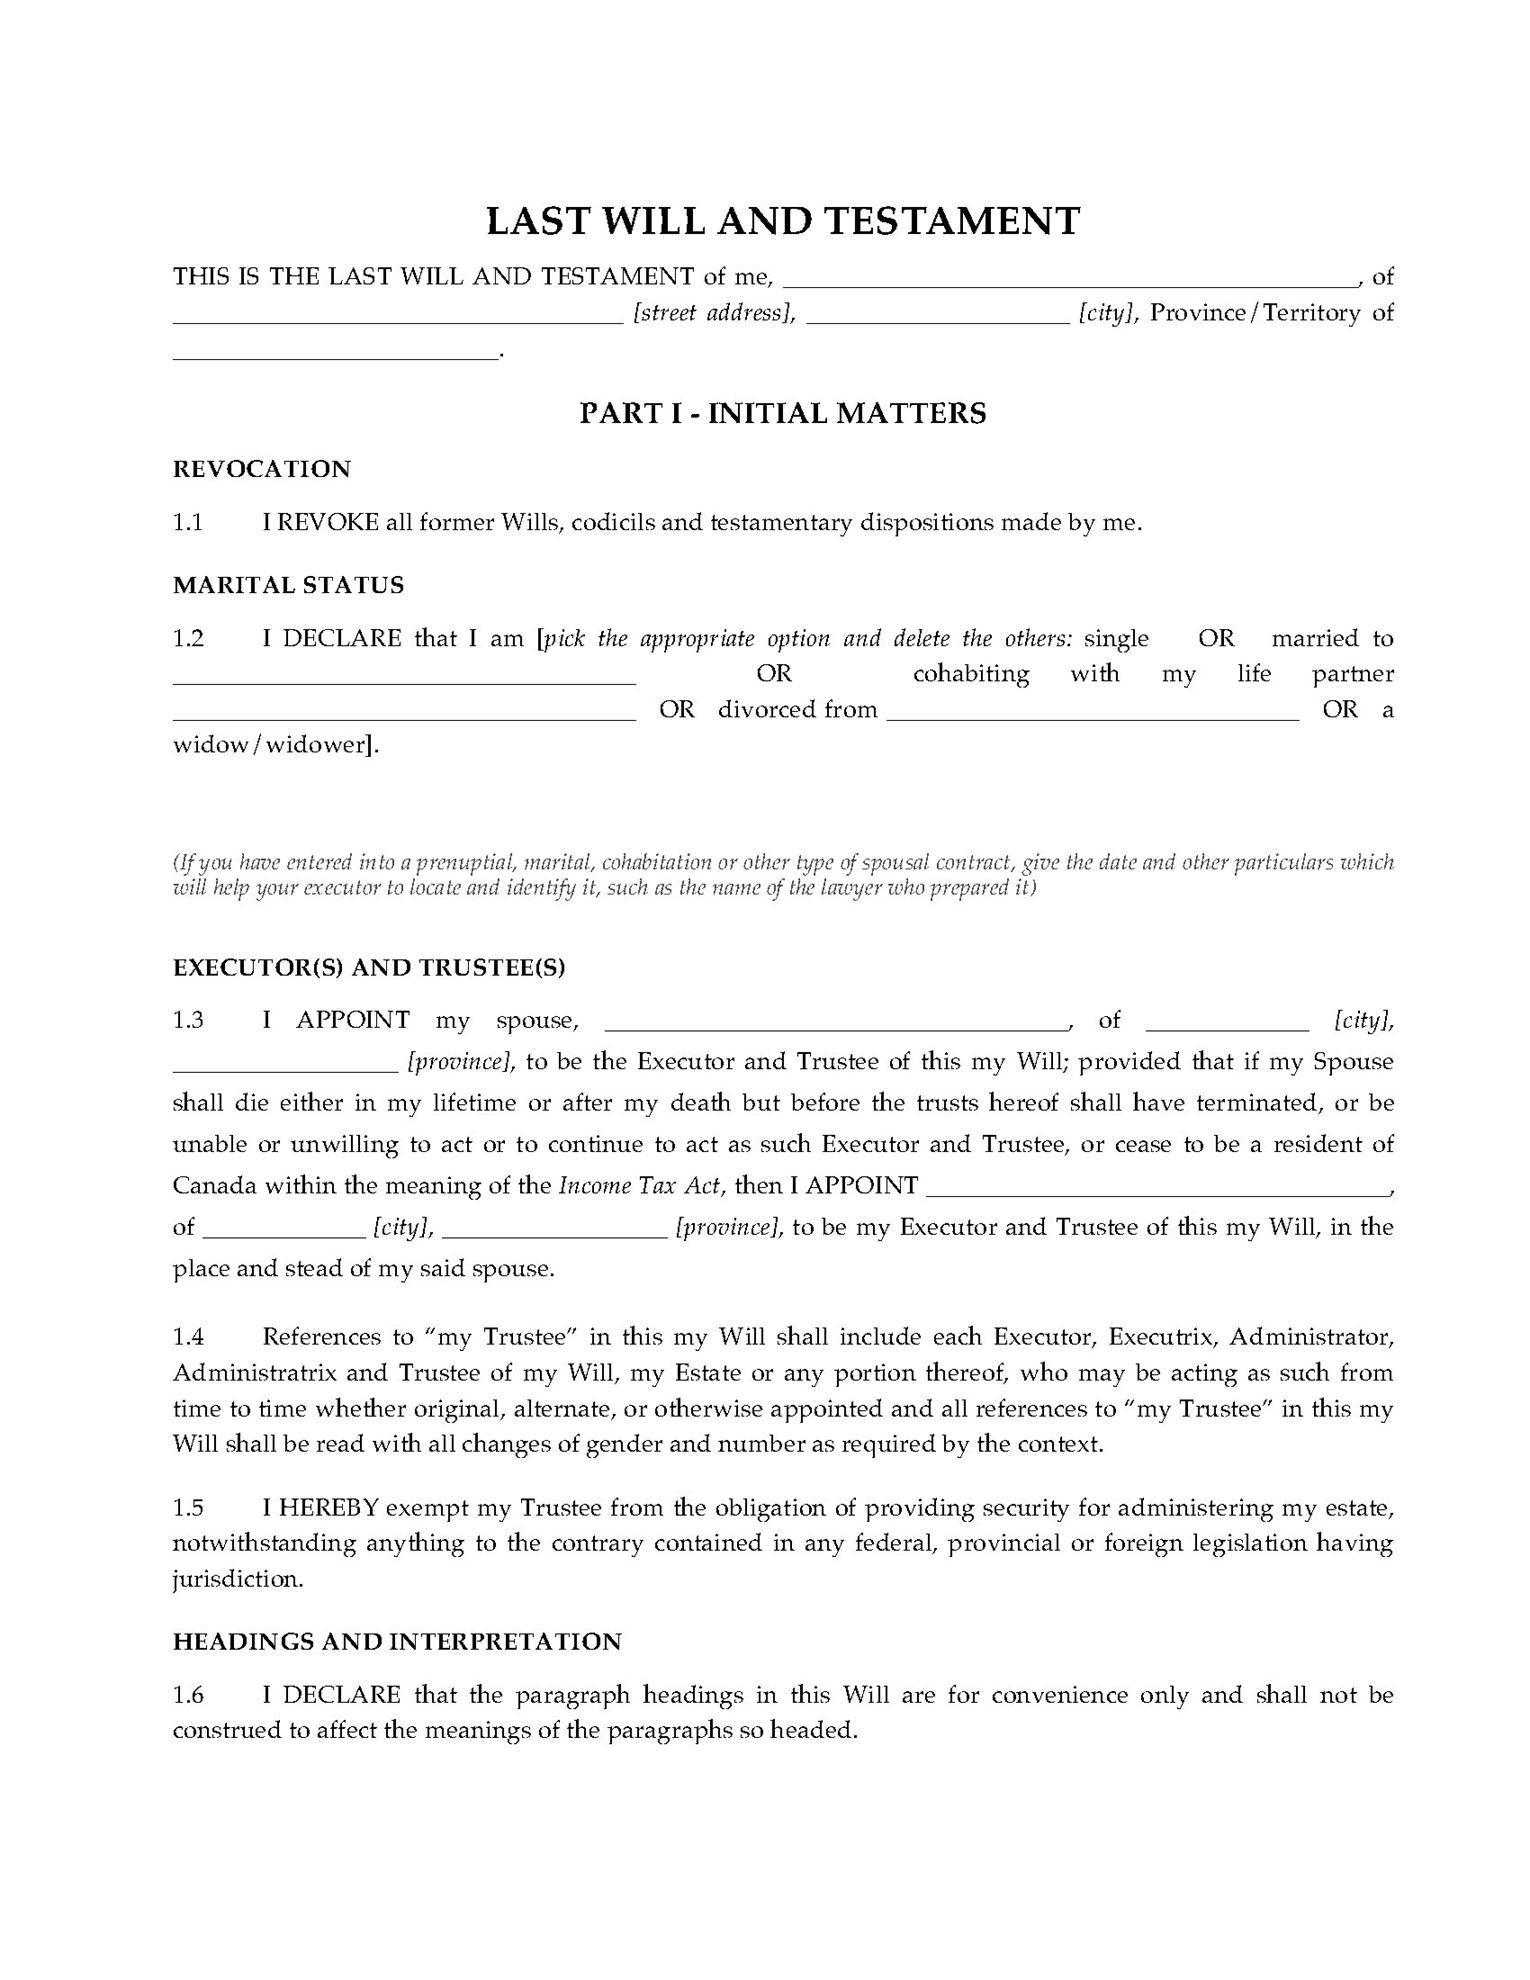 forms-ontario-template-free-printable-last-will-and-testament-canada